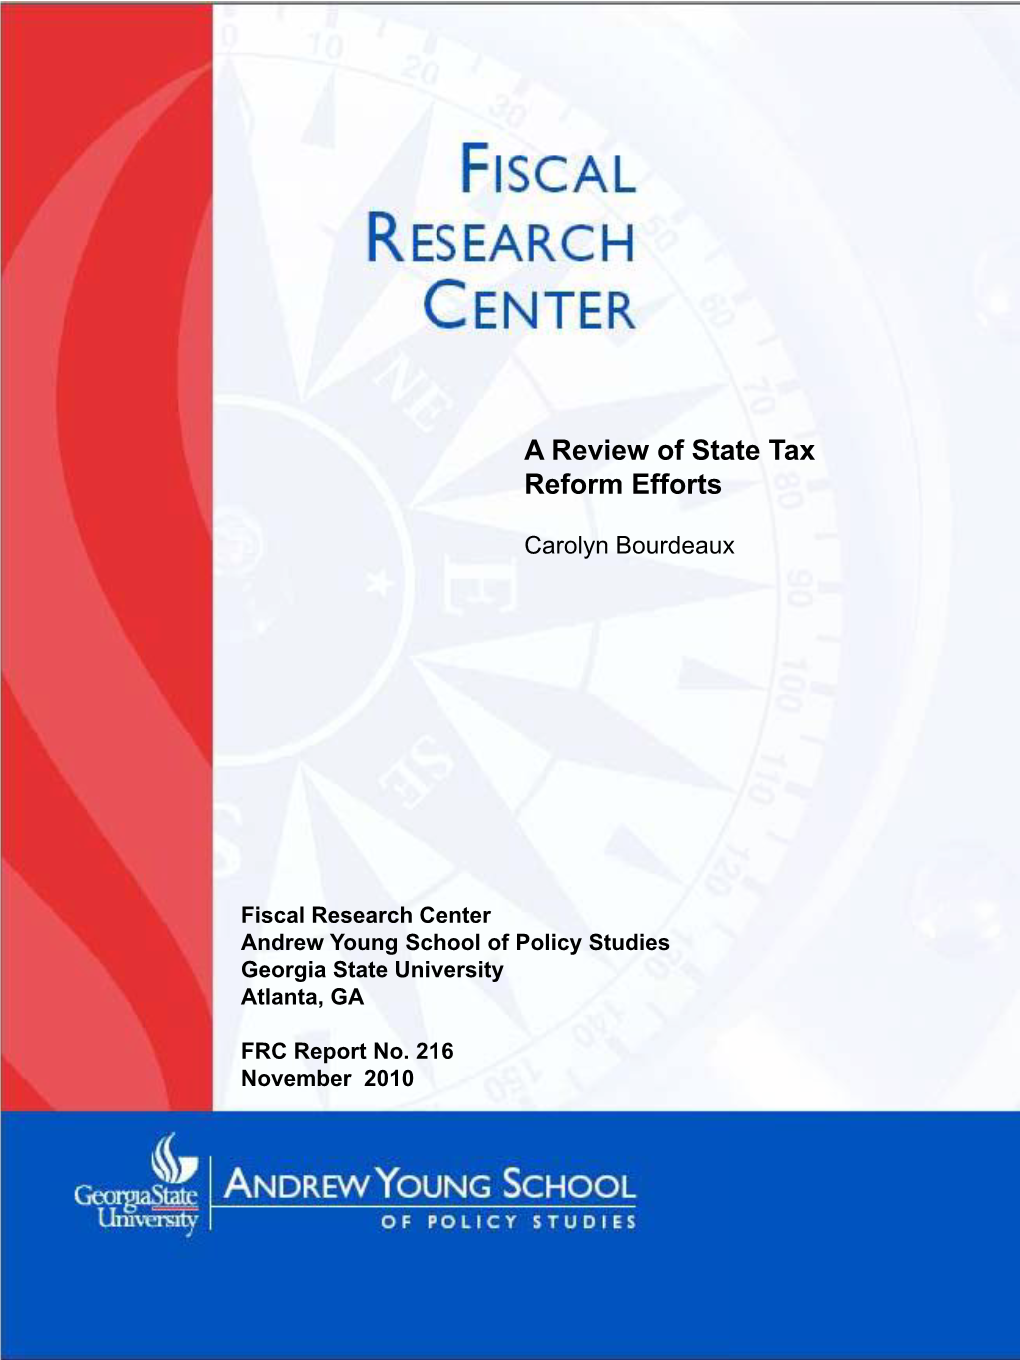 A Review of State Tax Reform Efforts